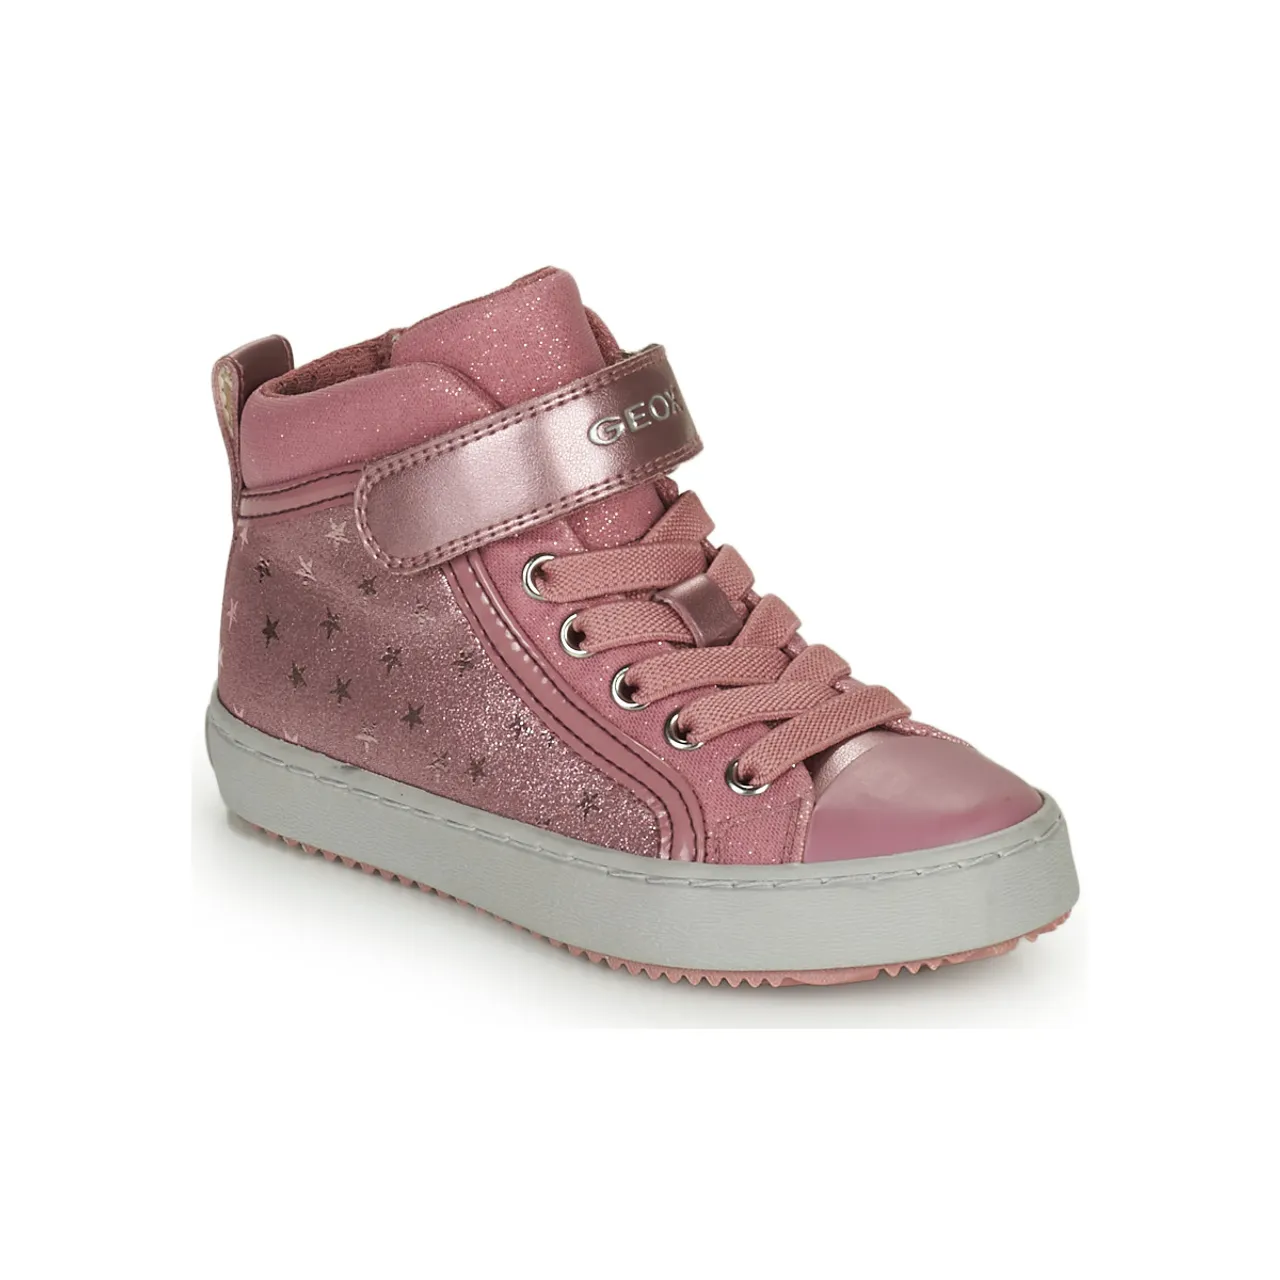 Geox  J KALISPERA GIRL I  girls's Children's Shoes (High-top Trainers) in Pink